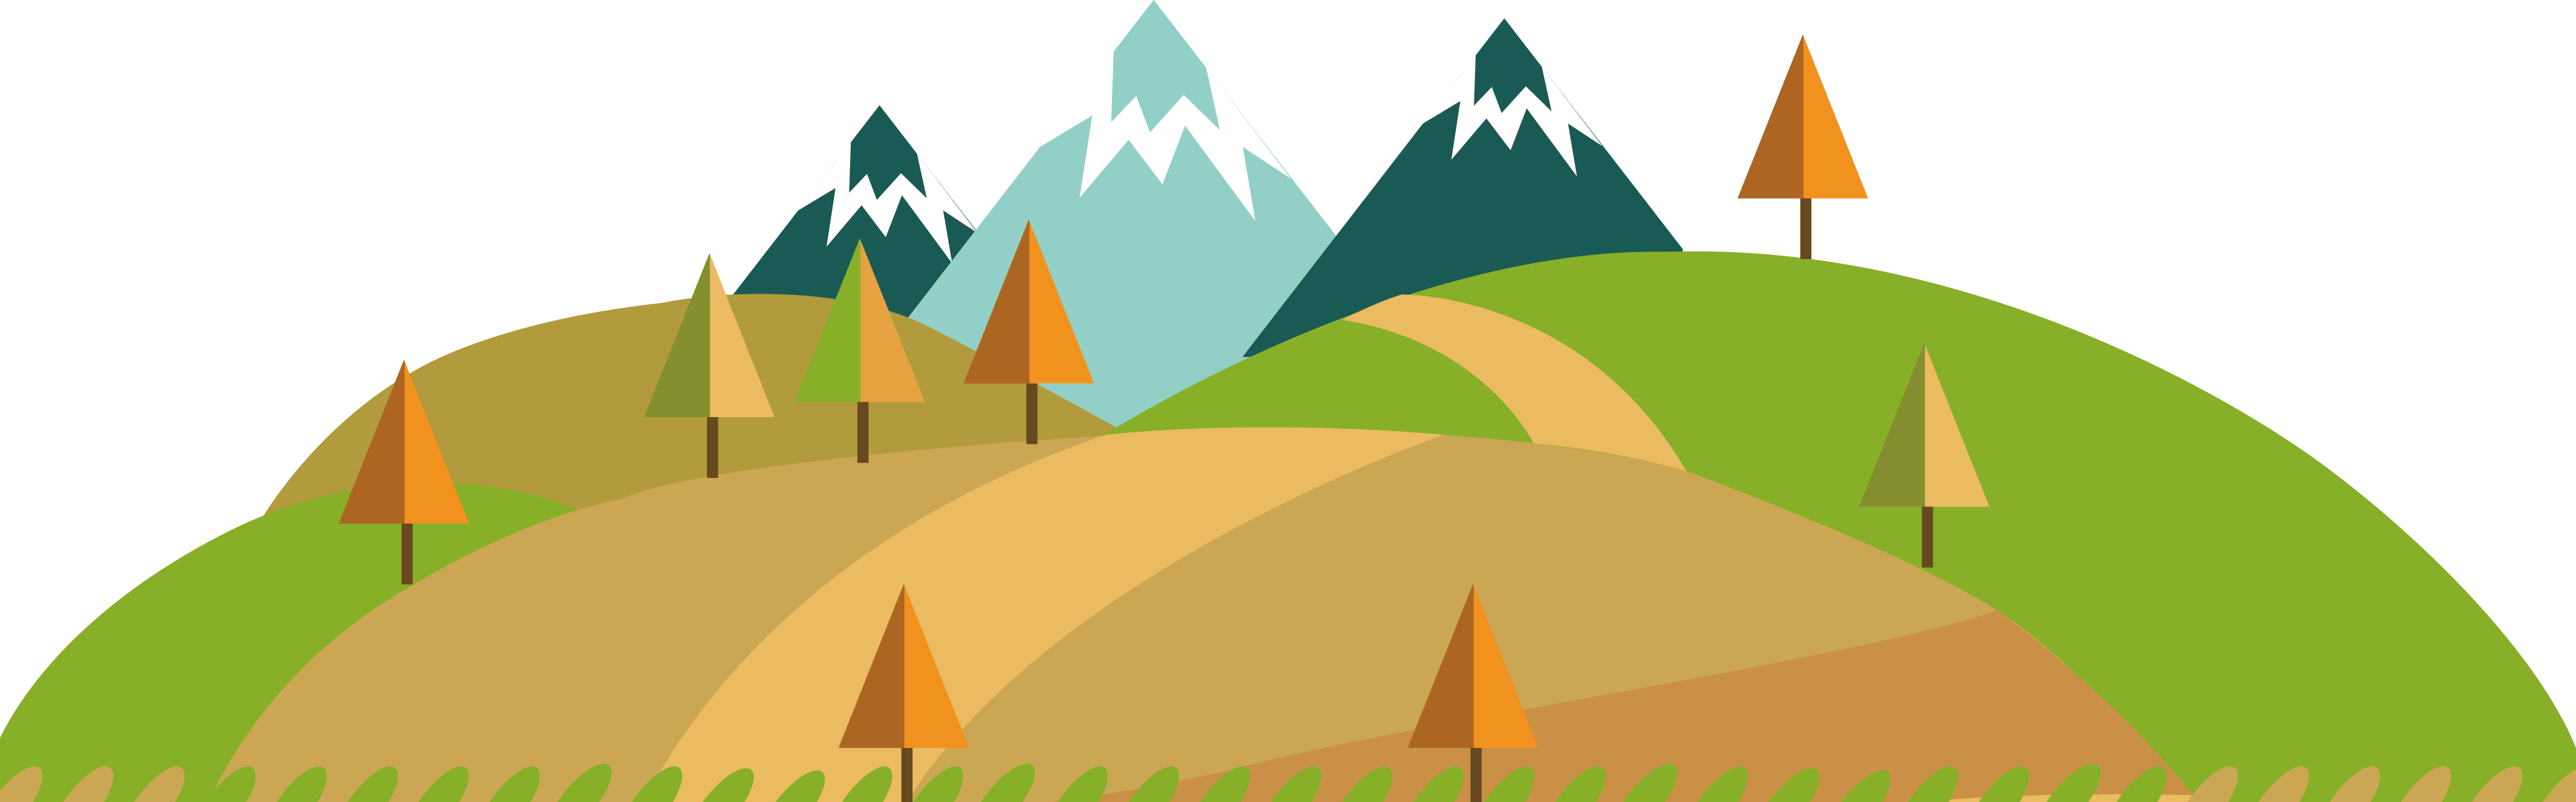 Cartoon Mountains PNG Clipart